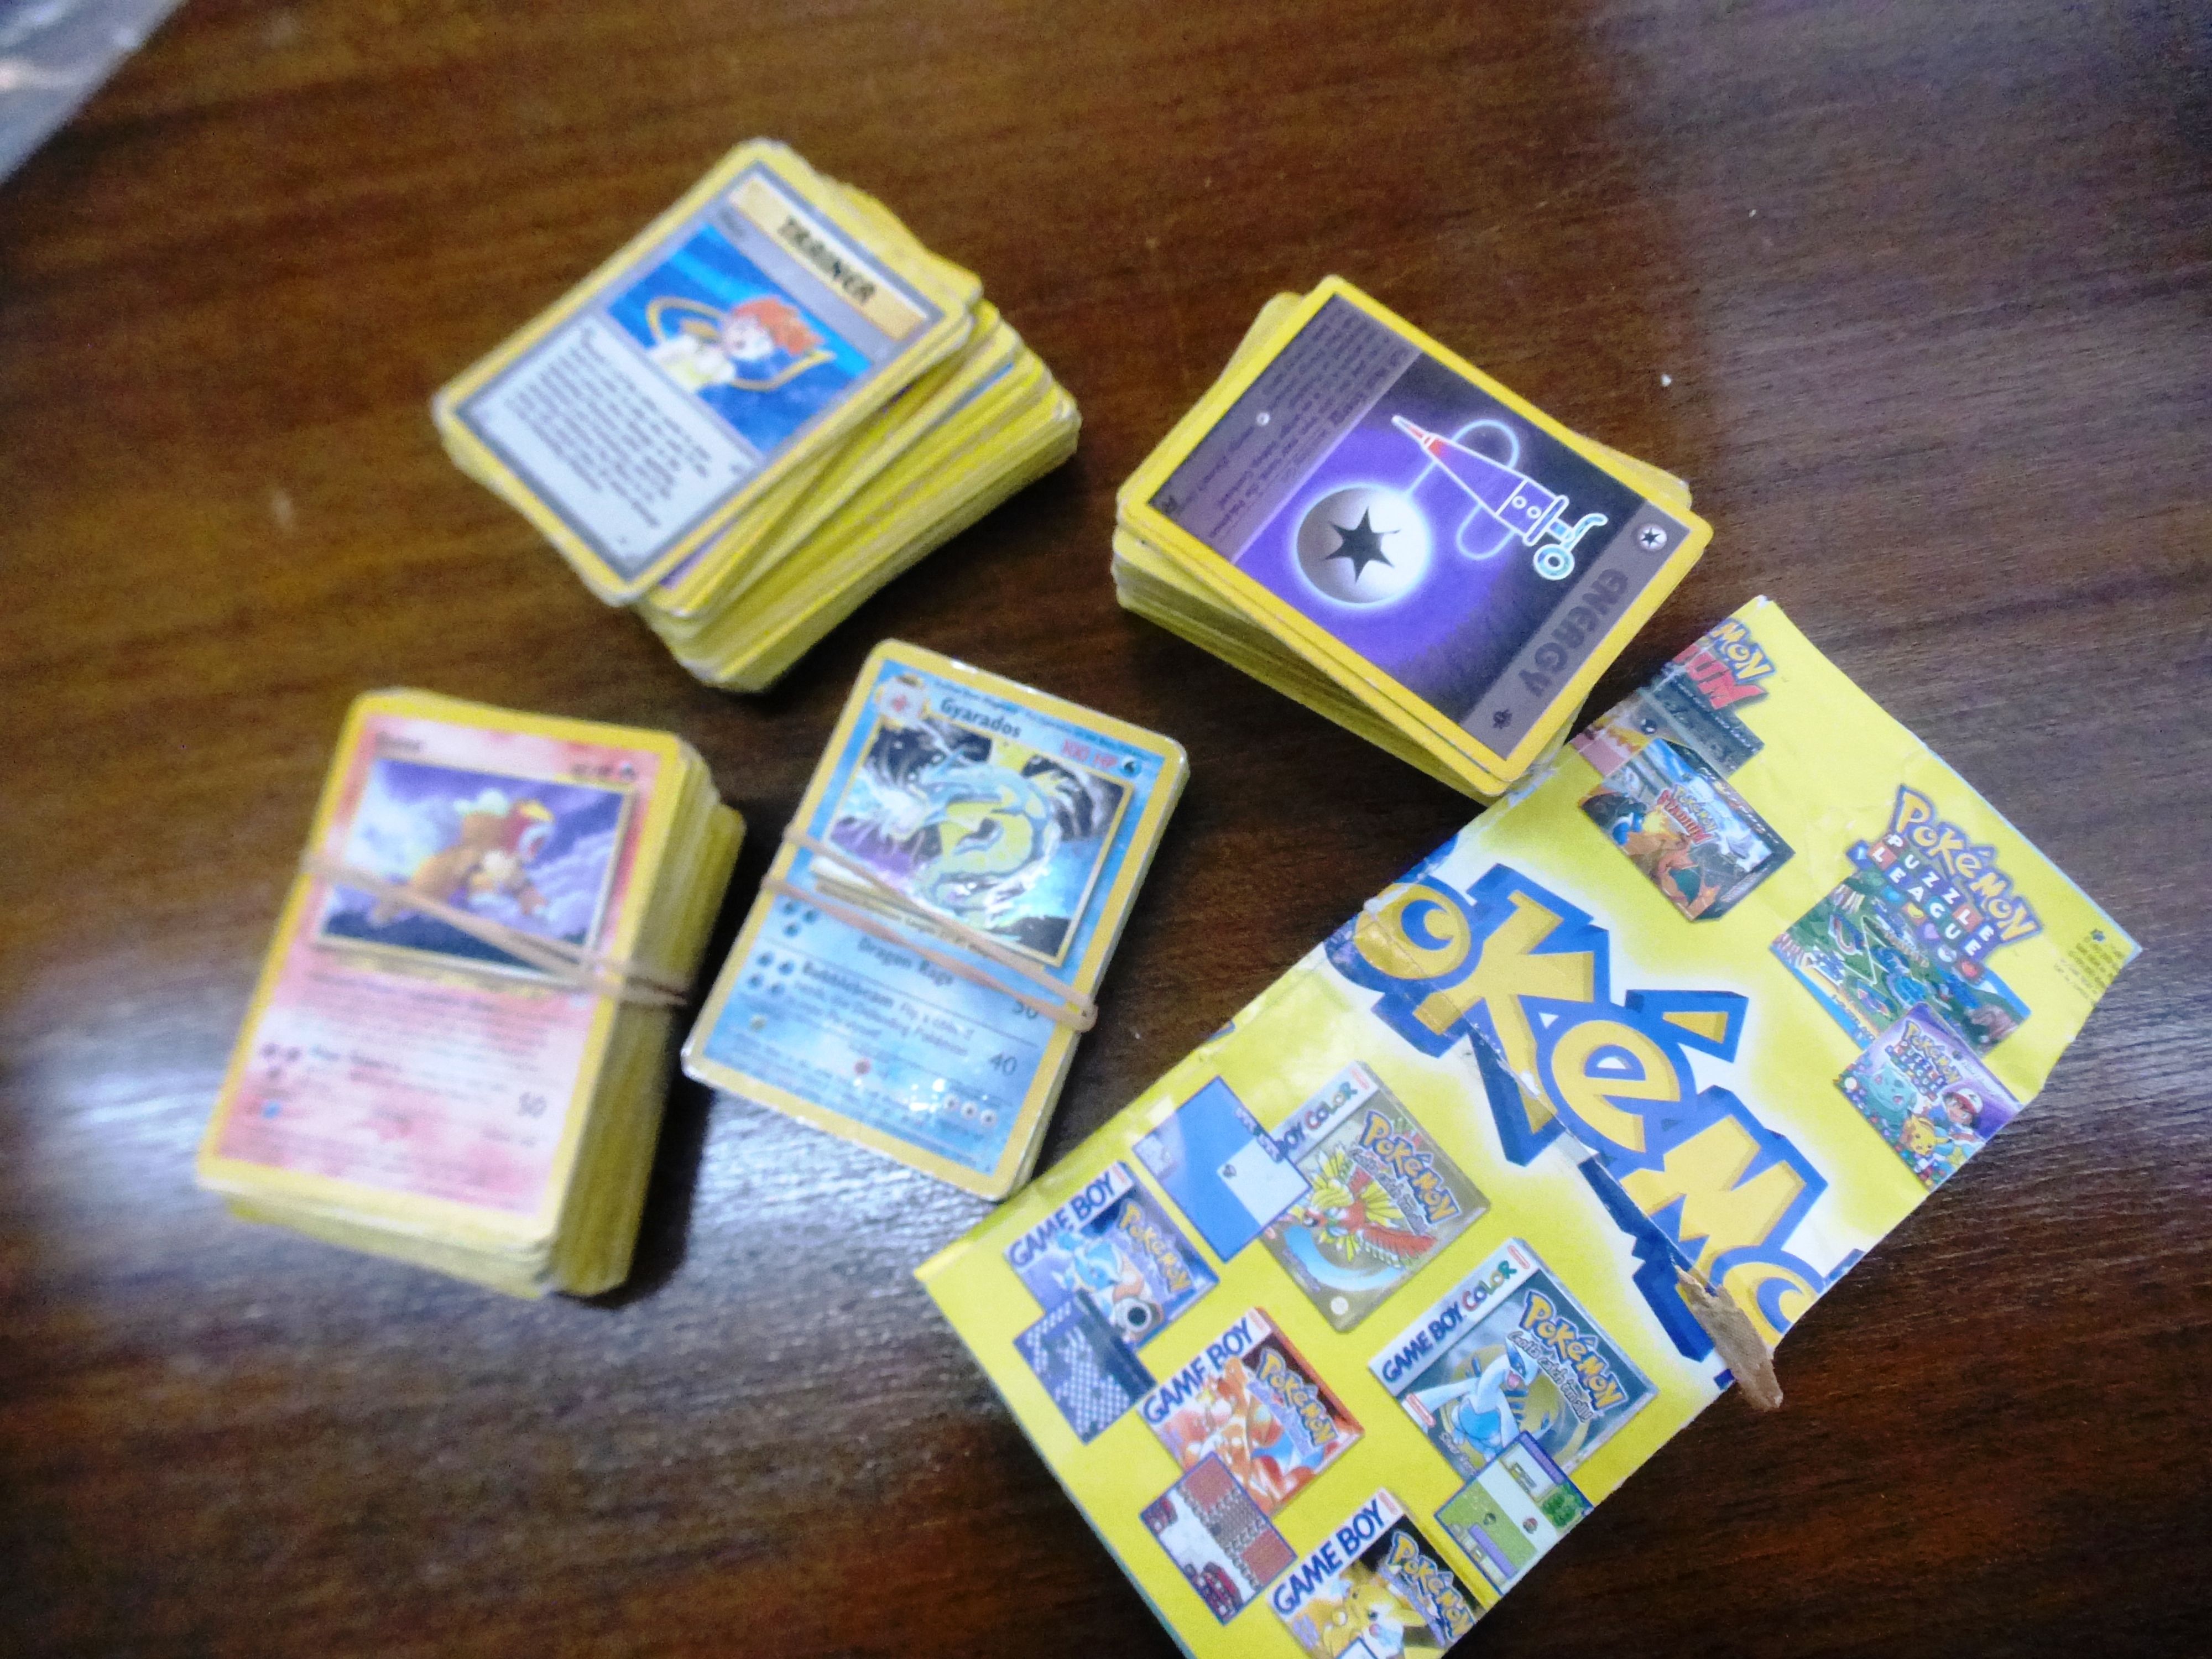 3 BAGS OF ASSORTED TRADING CARDS INCLUDING POKEMON, YU-GI-OH AND HARRY POTTER - Image 2 of 4